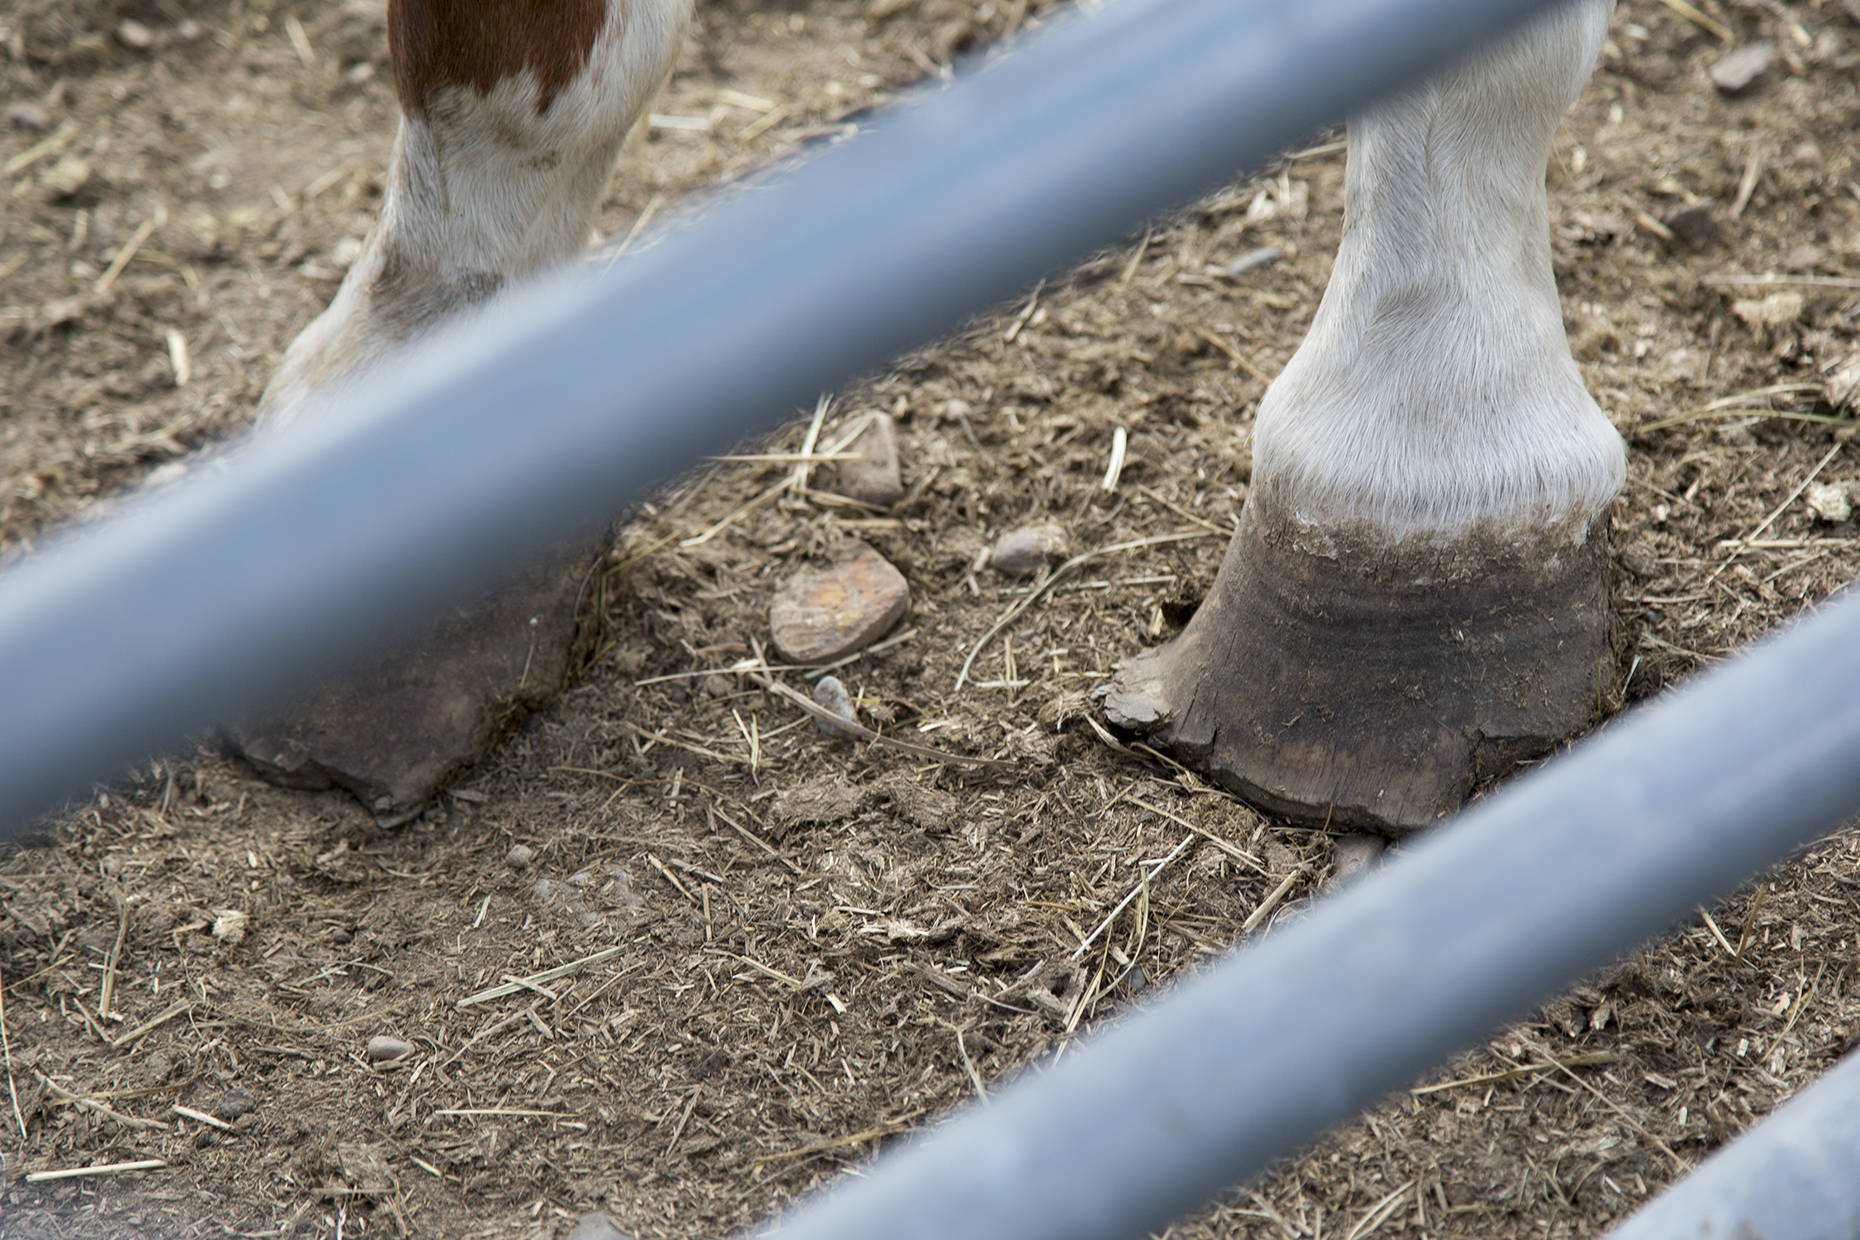 Horse hooves need to be trimmed on a regular basis and is a major task involved with horse management. Improper management of a horse’s hooves can lead to lameness. Ashley Hiruko/staff photo